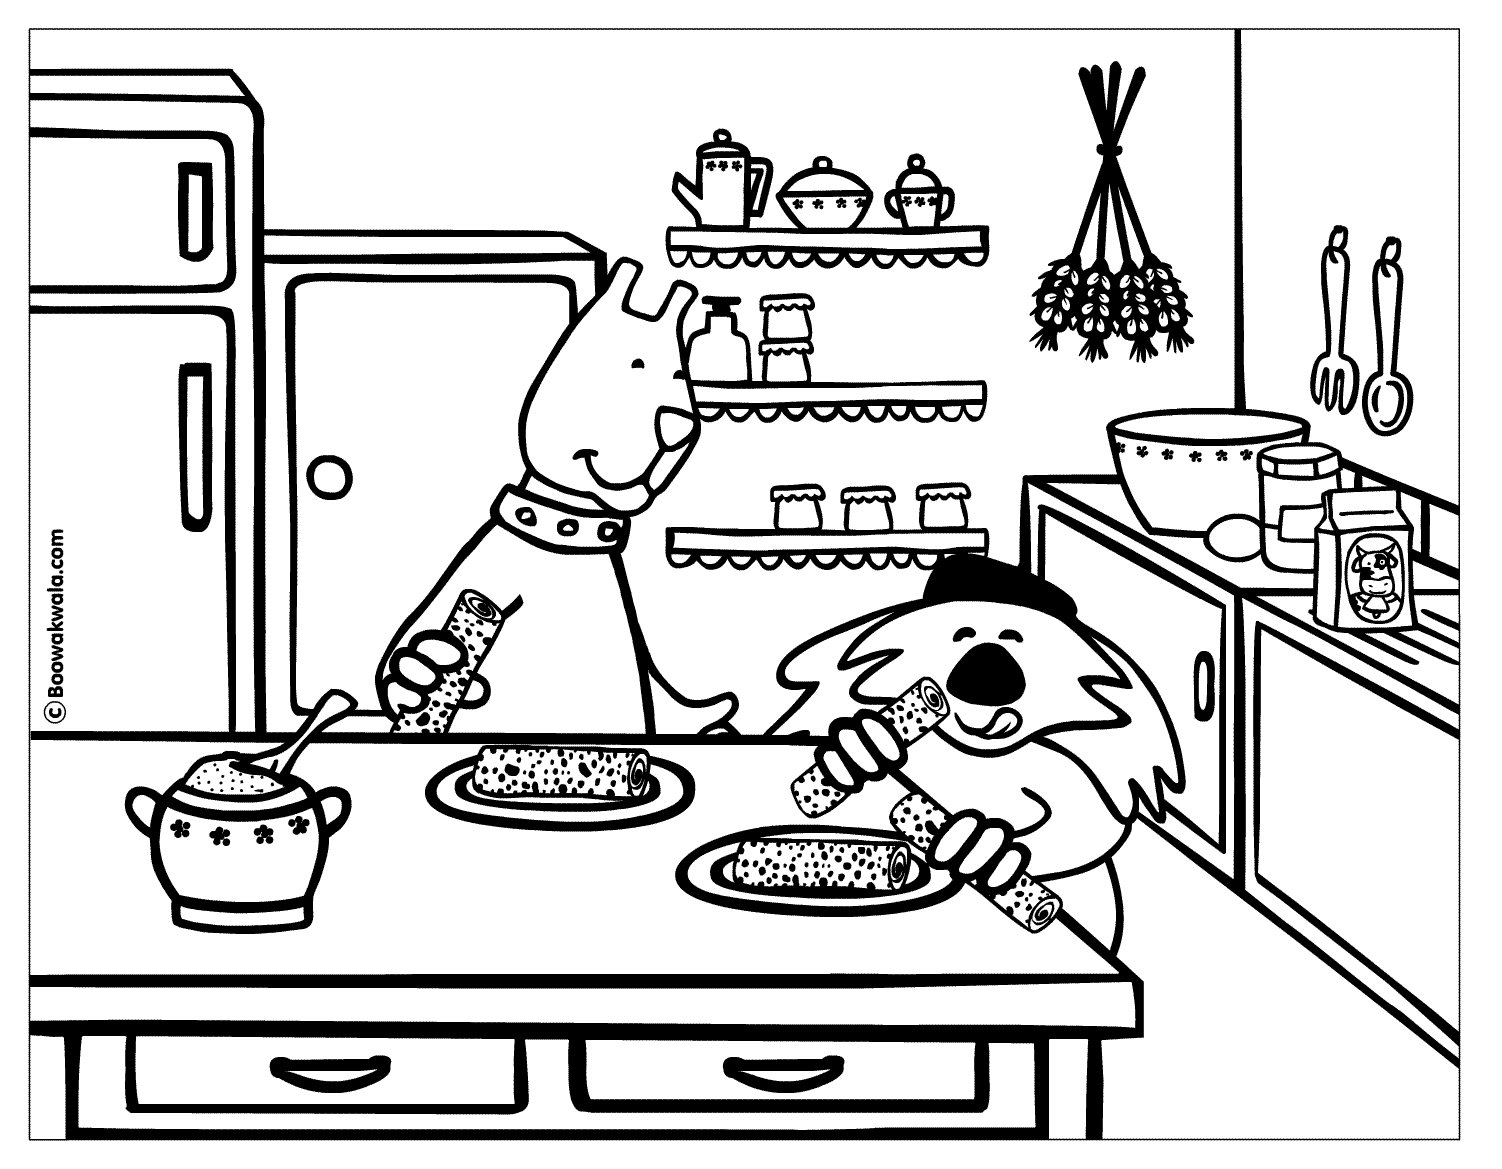 Kitchen / Cooking Coloring Page